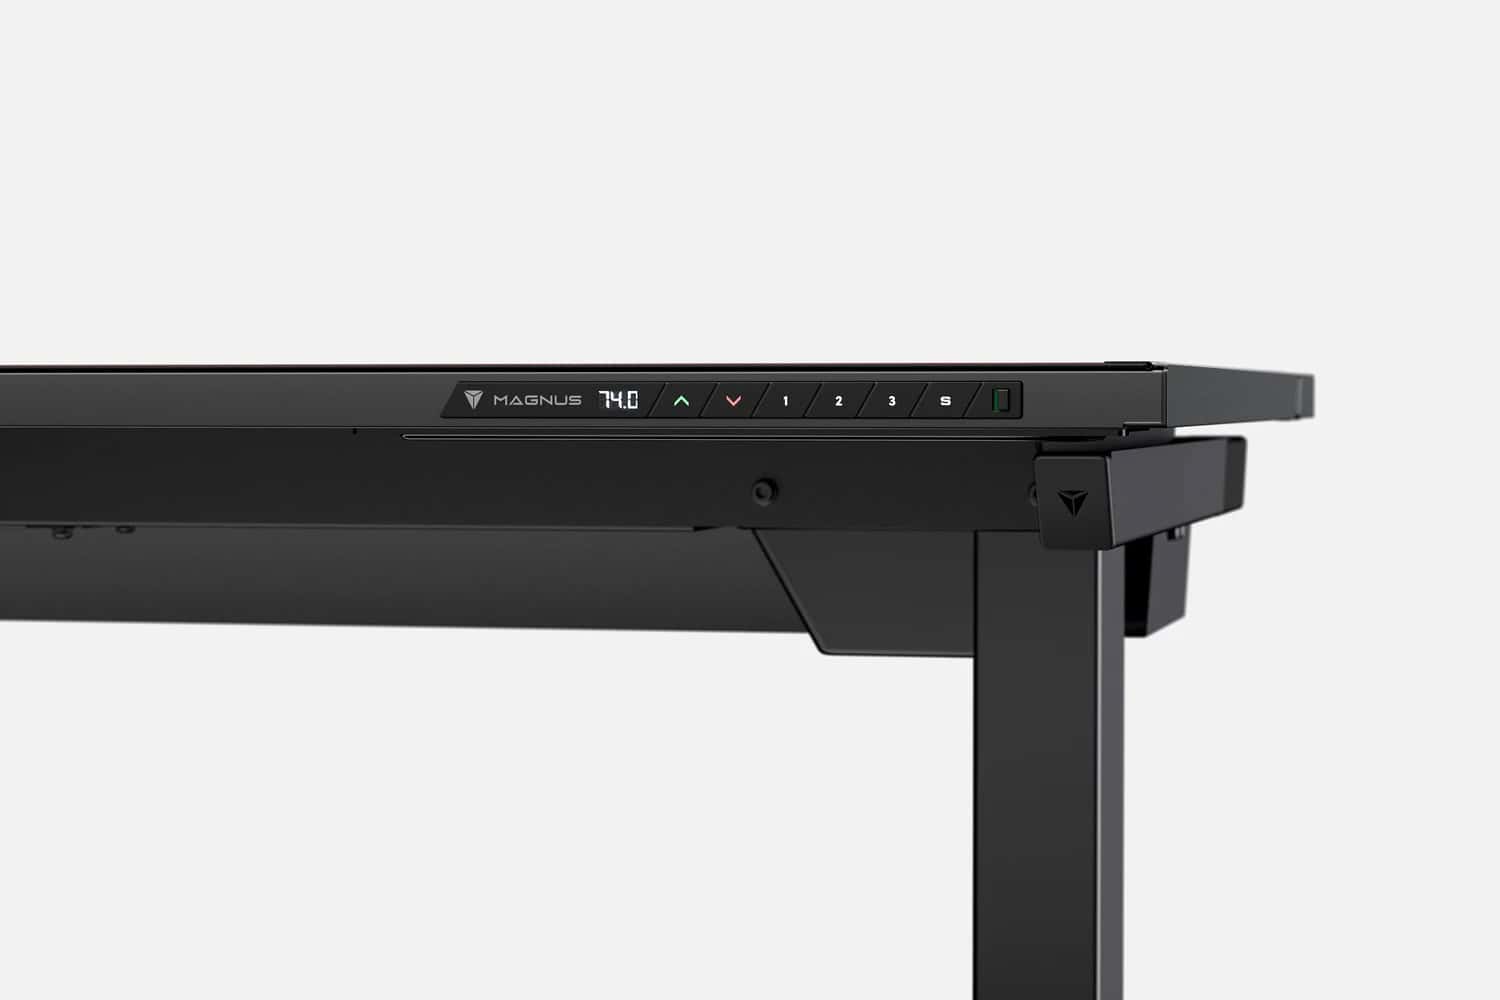 Close-up view of a black adjustable height desk with control buttons and a brand logo on the front panel.